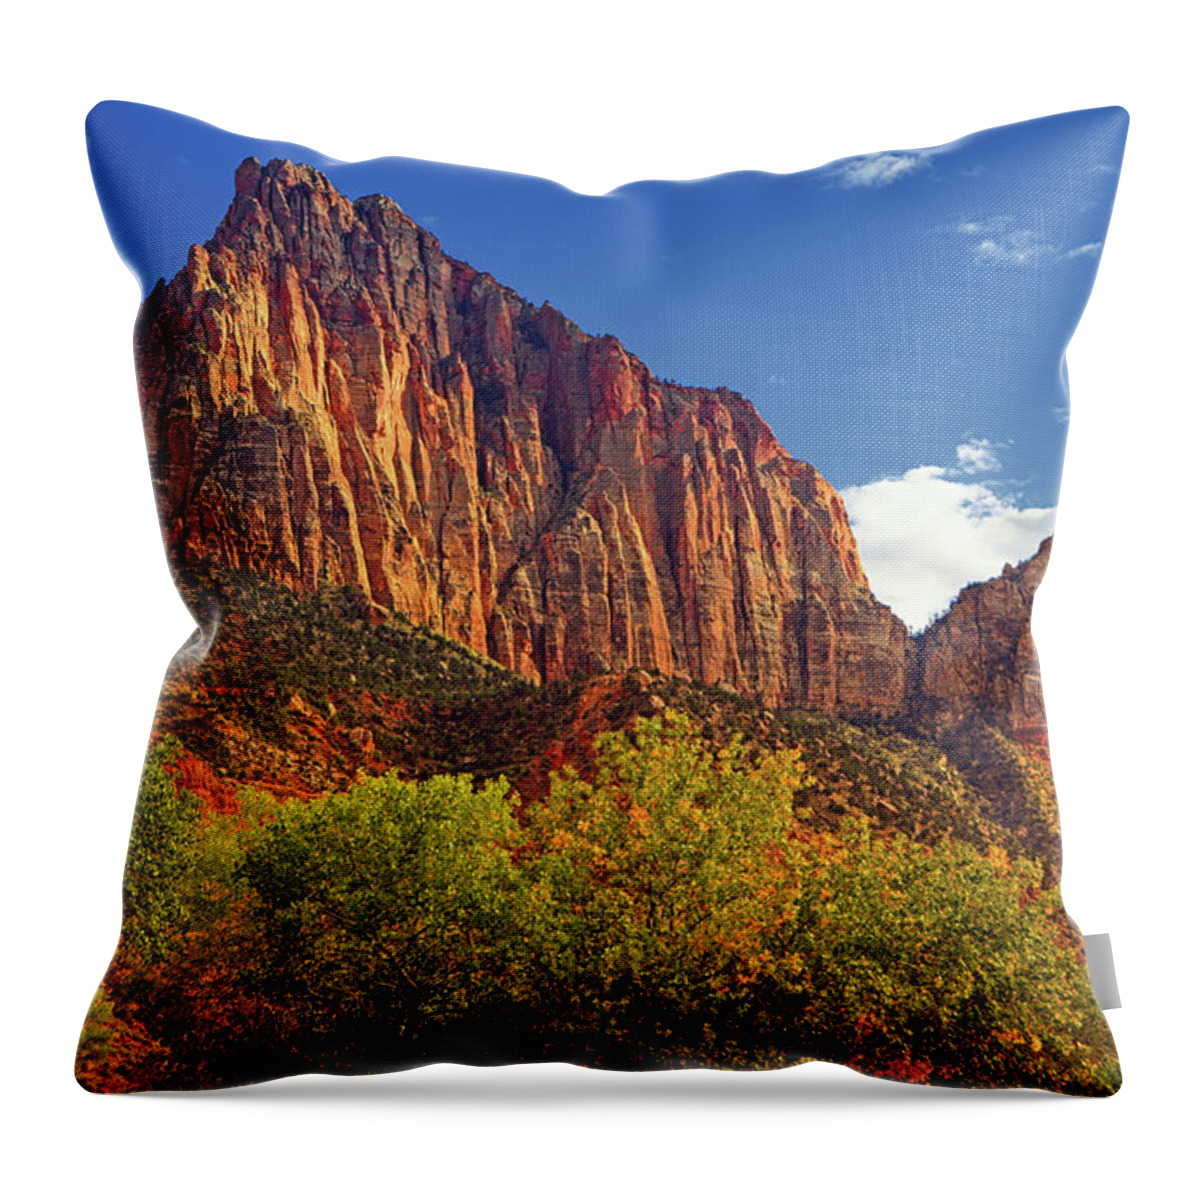 The Watchman Throw Pillow featuring the photograph The Watchman #1 by Raymond Salani III